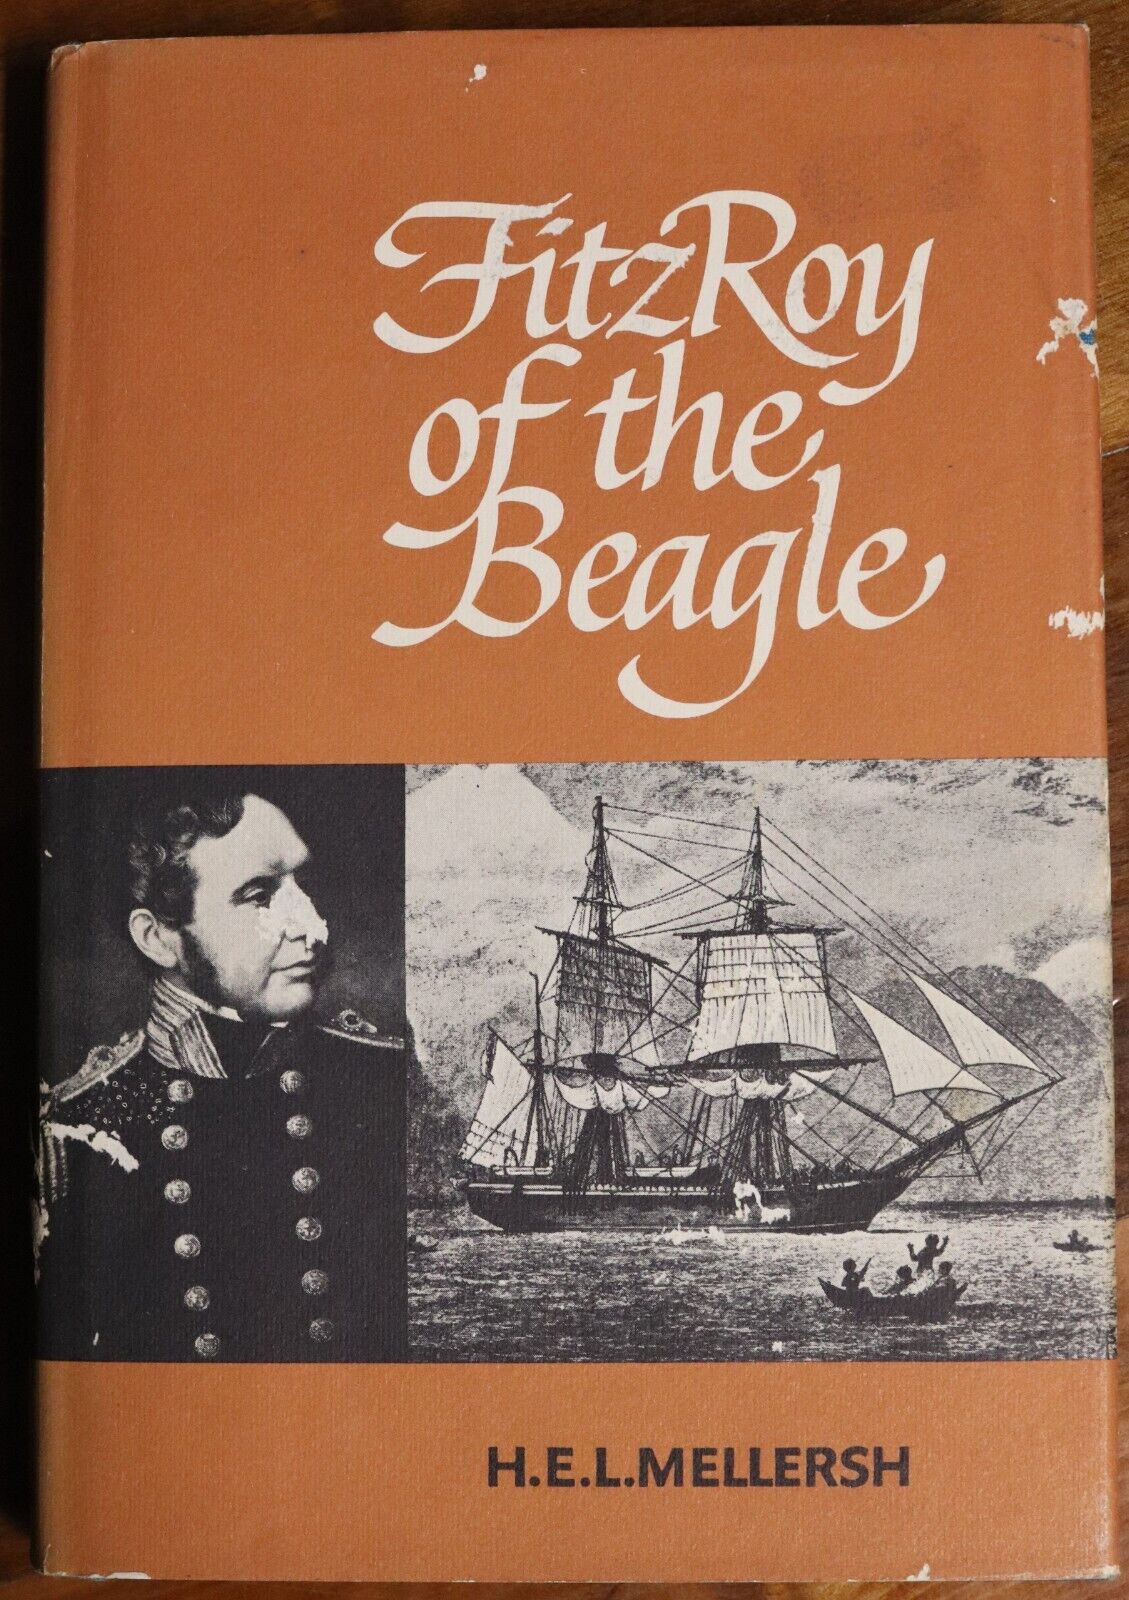 Fitzroy Of The Beagle by H.E.L. Mellersh - 1968 - 1st Ed. Darwin Science Book